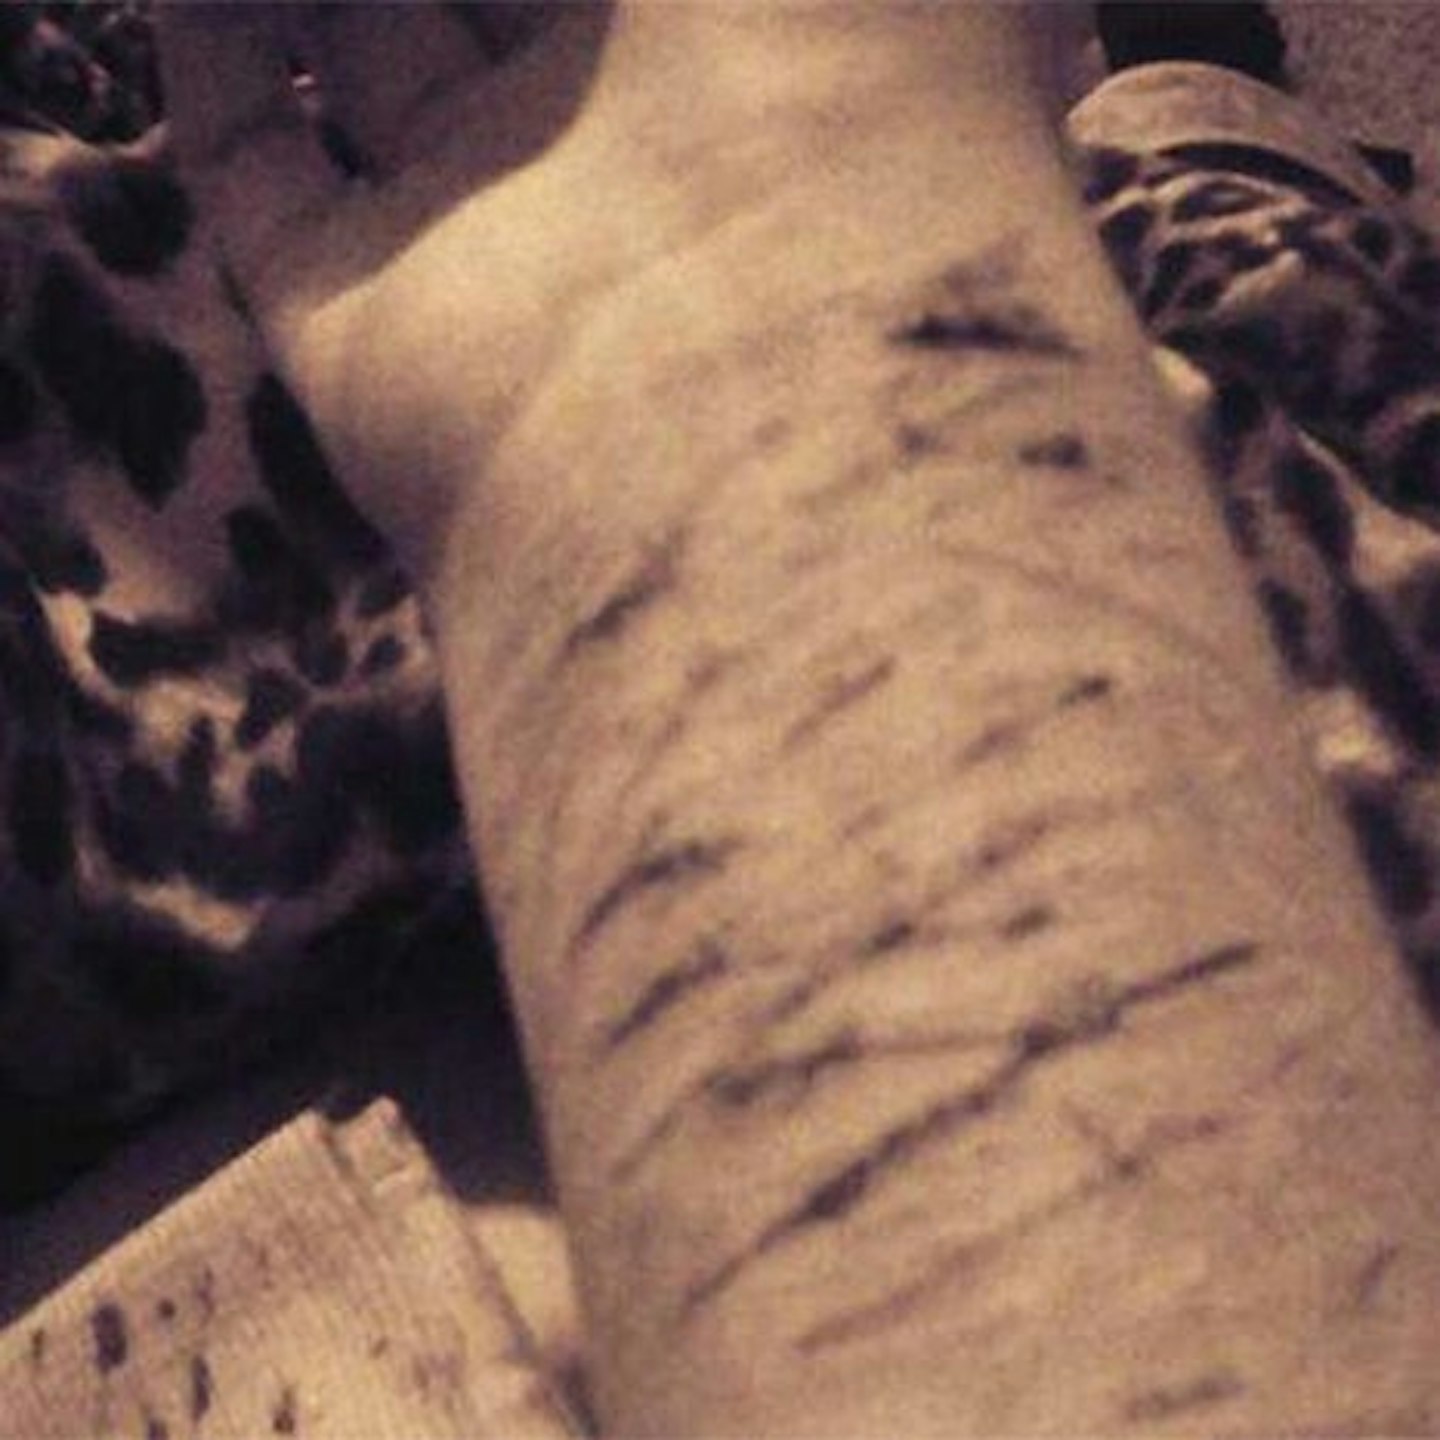 A shocking picture of self-harm on Instagram